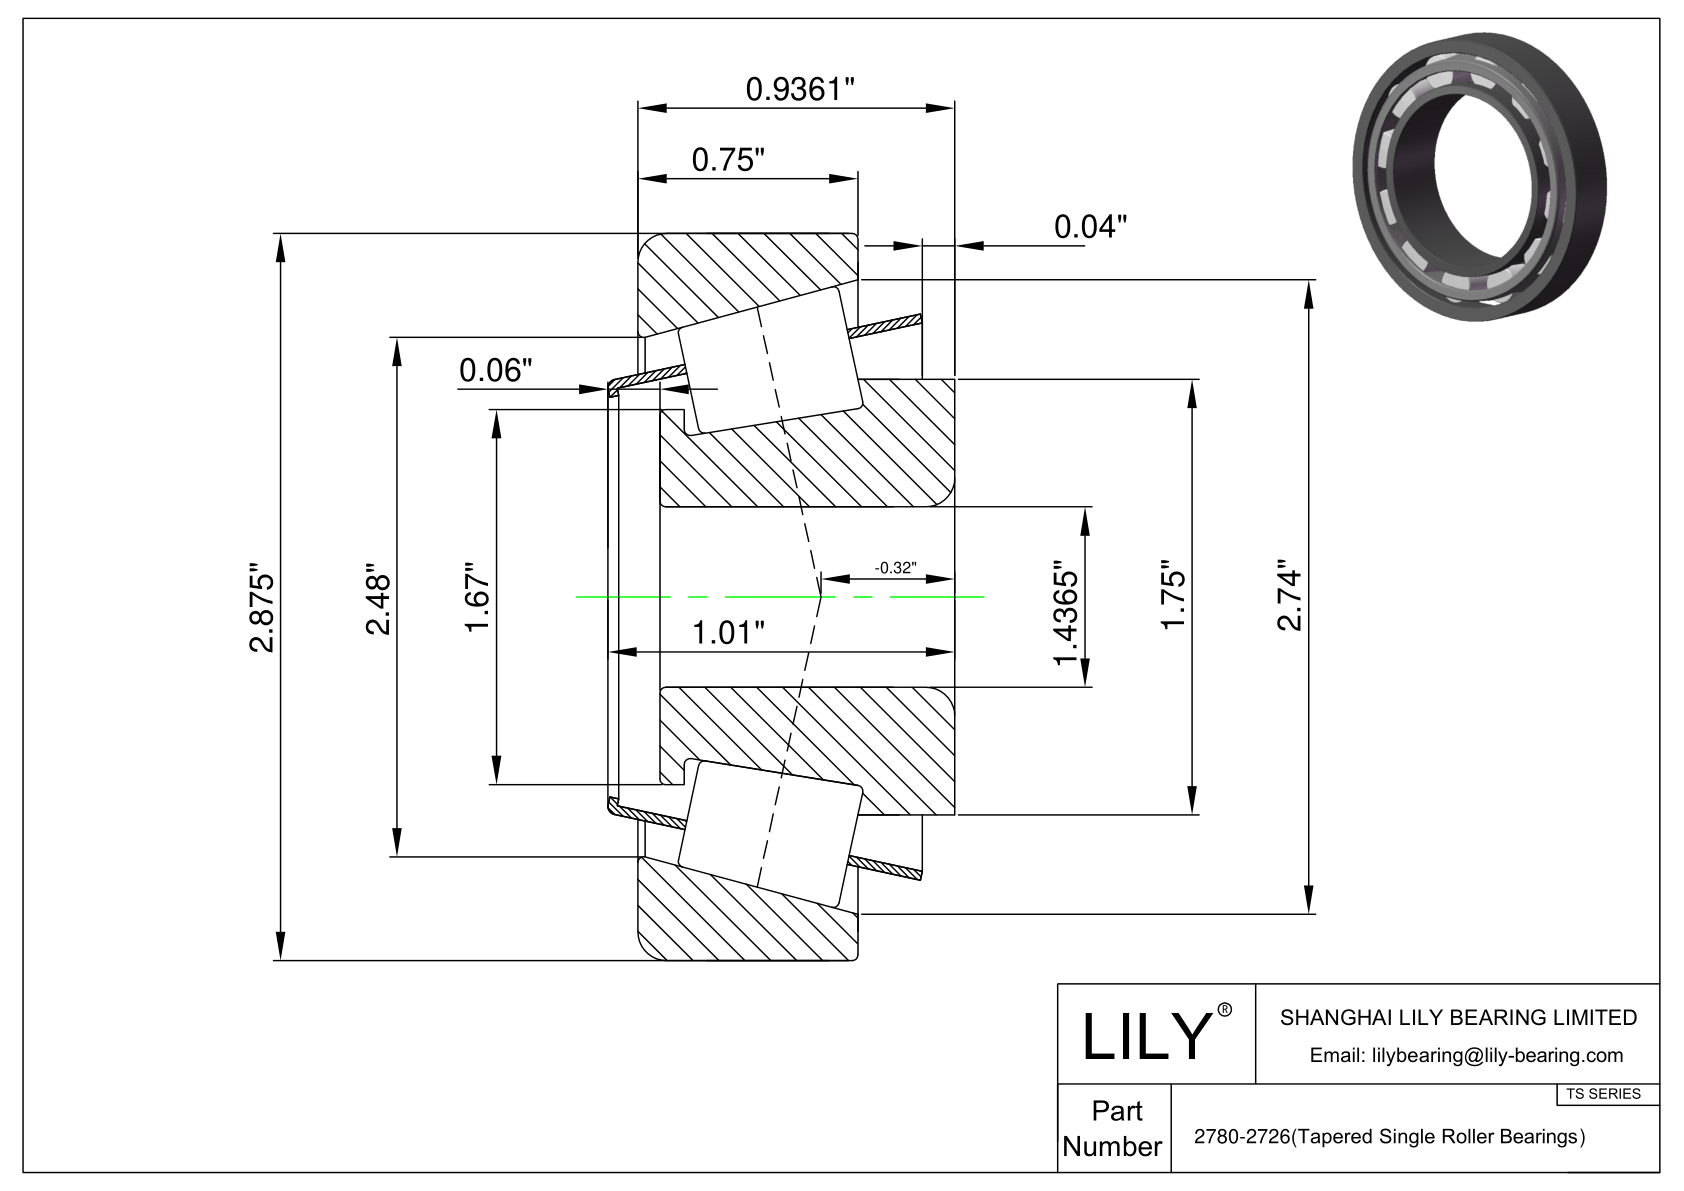 2780-2726 TS (Tapered Single Roller Bearings) (Imperial) cad drawing